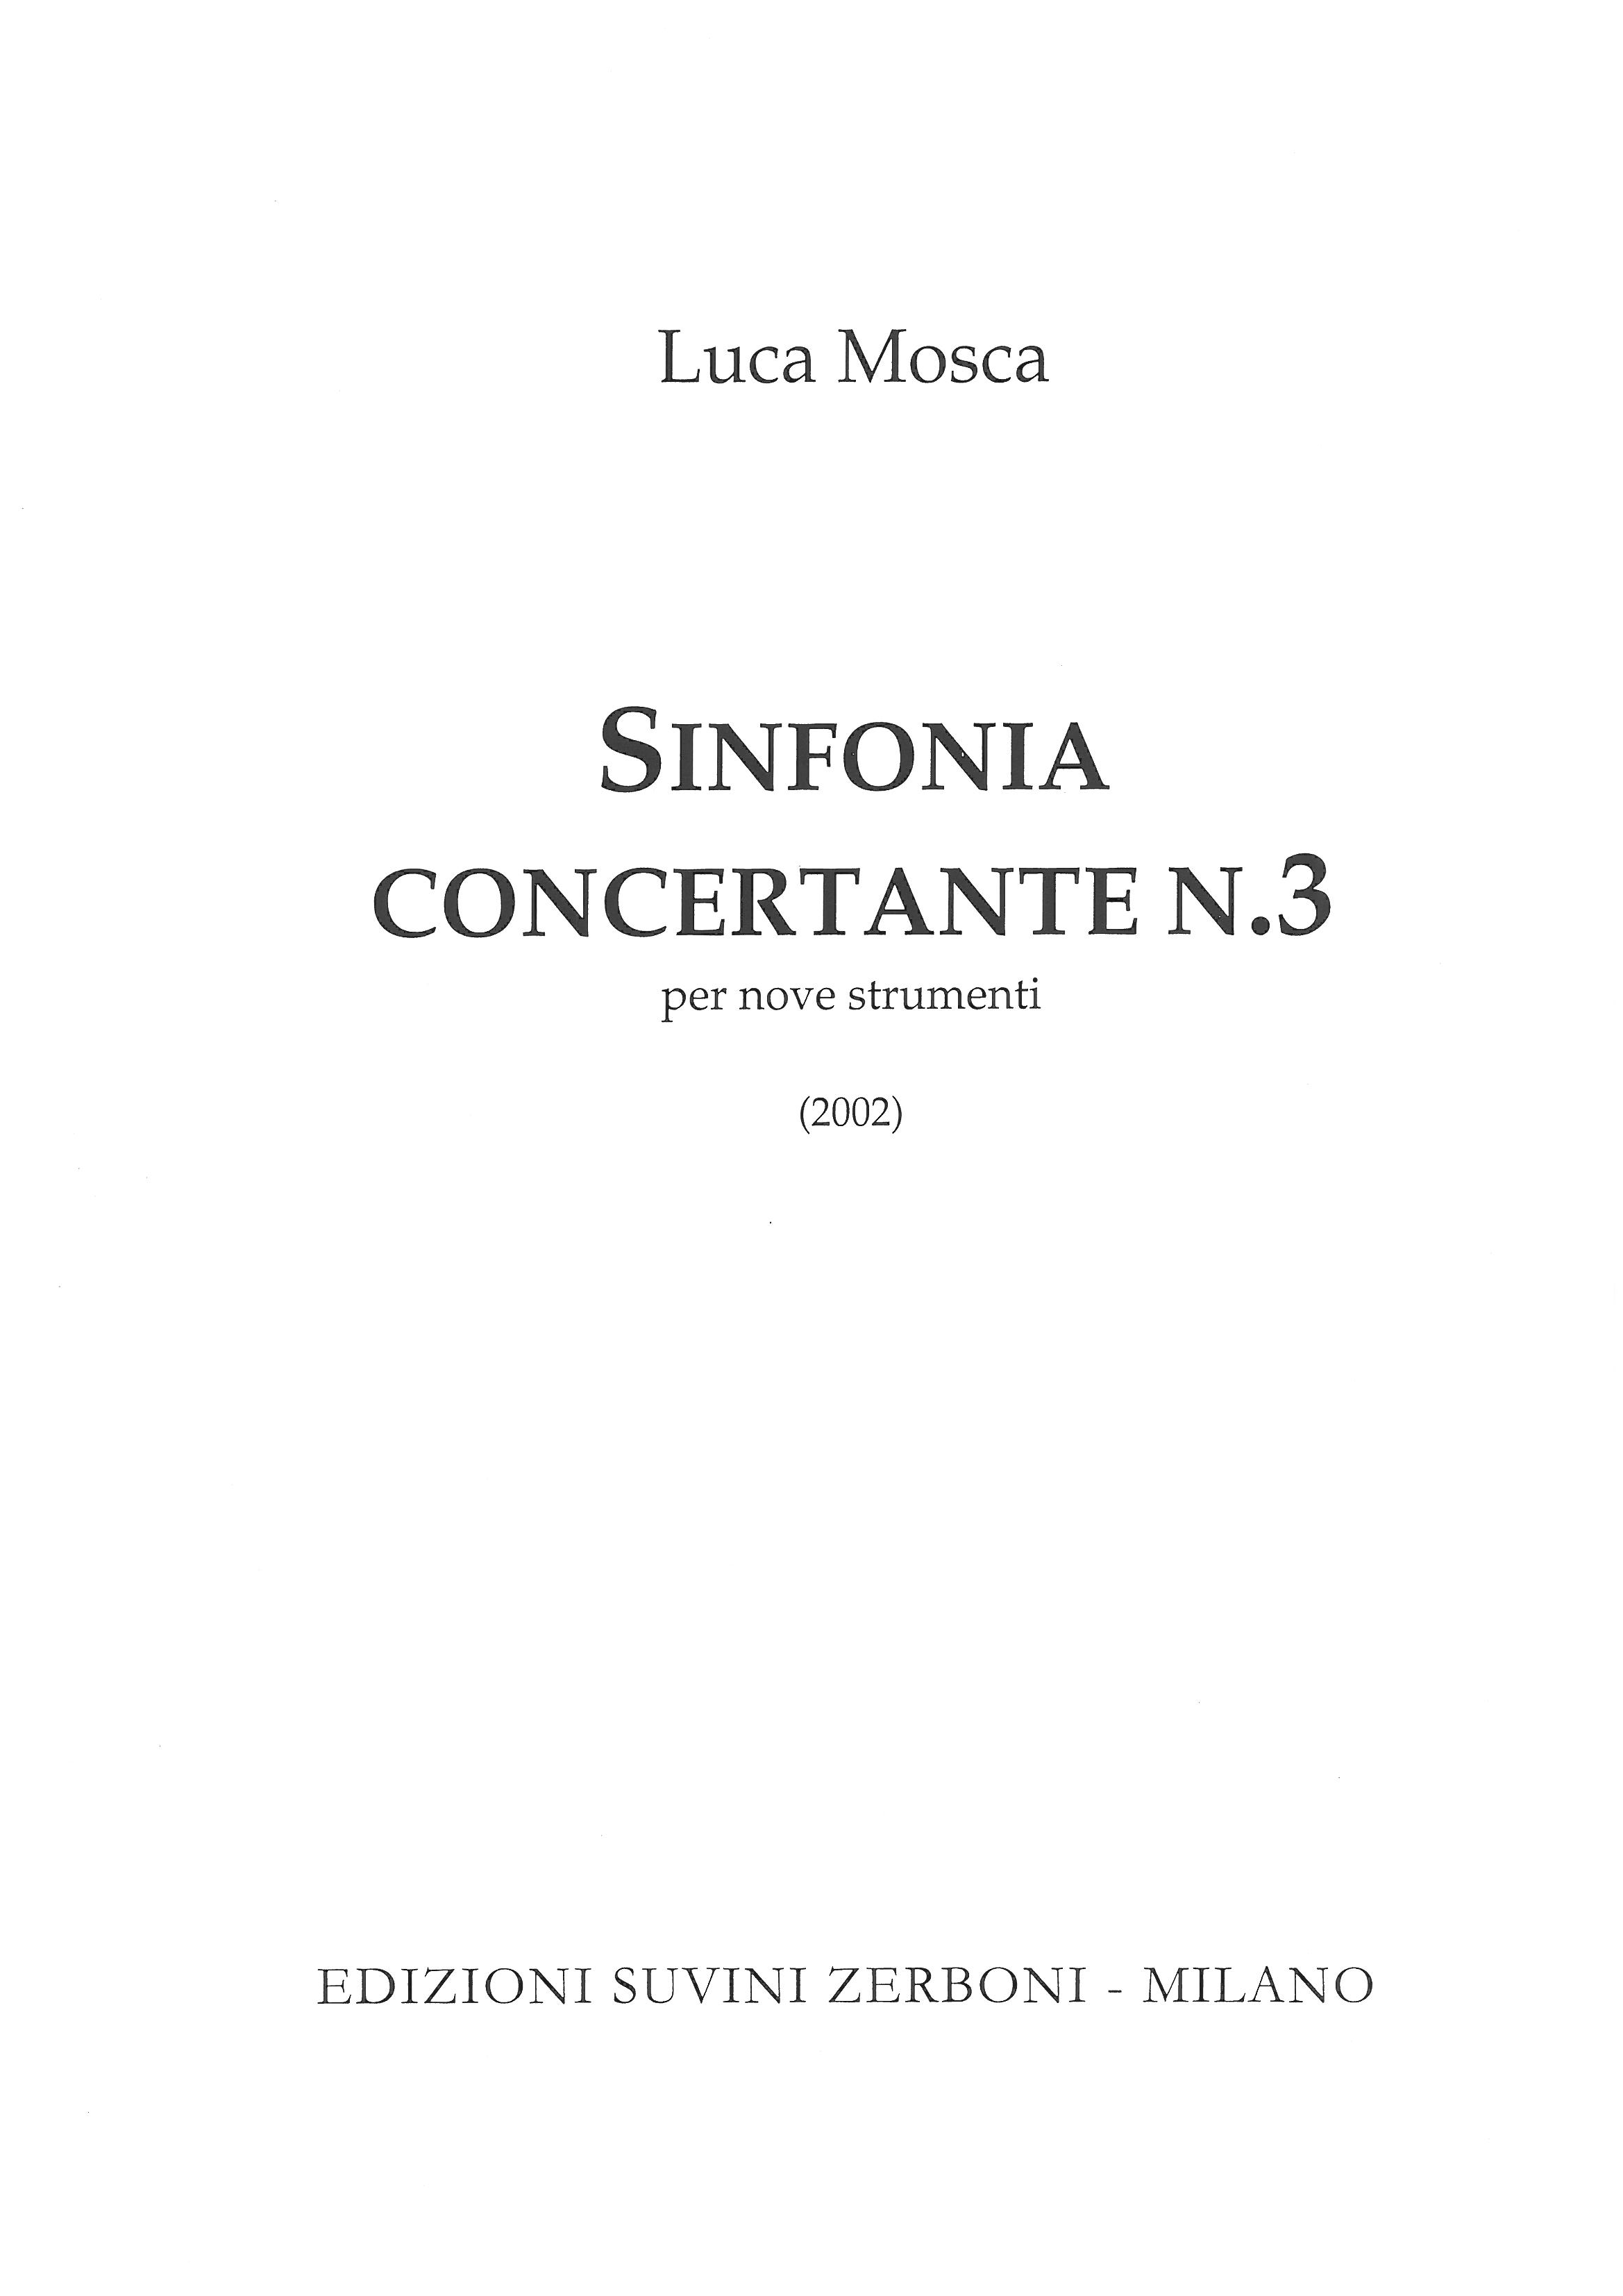 Sinfonia concertante n 3_Mosca 1 744